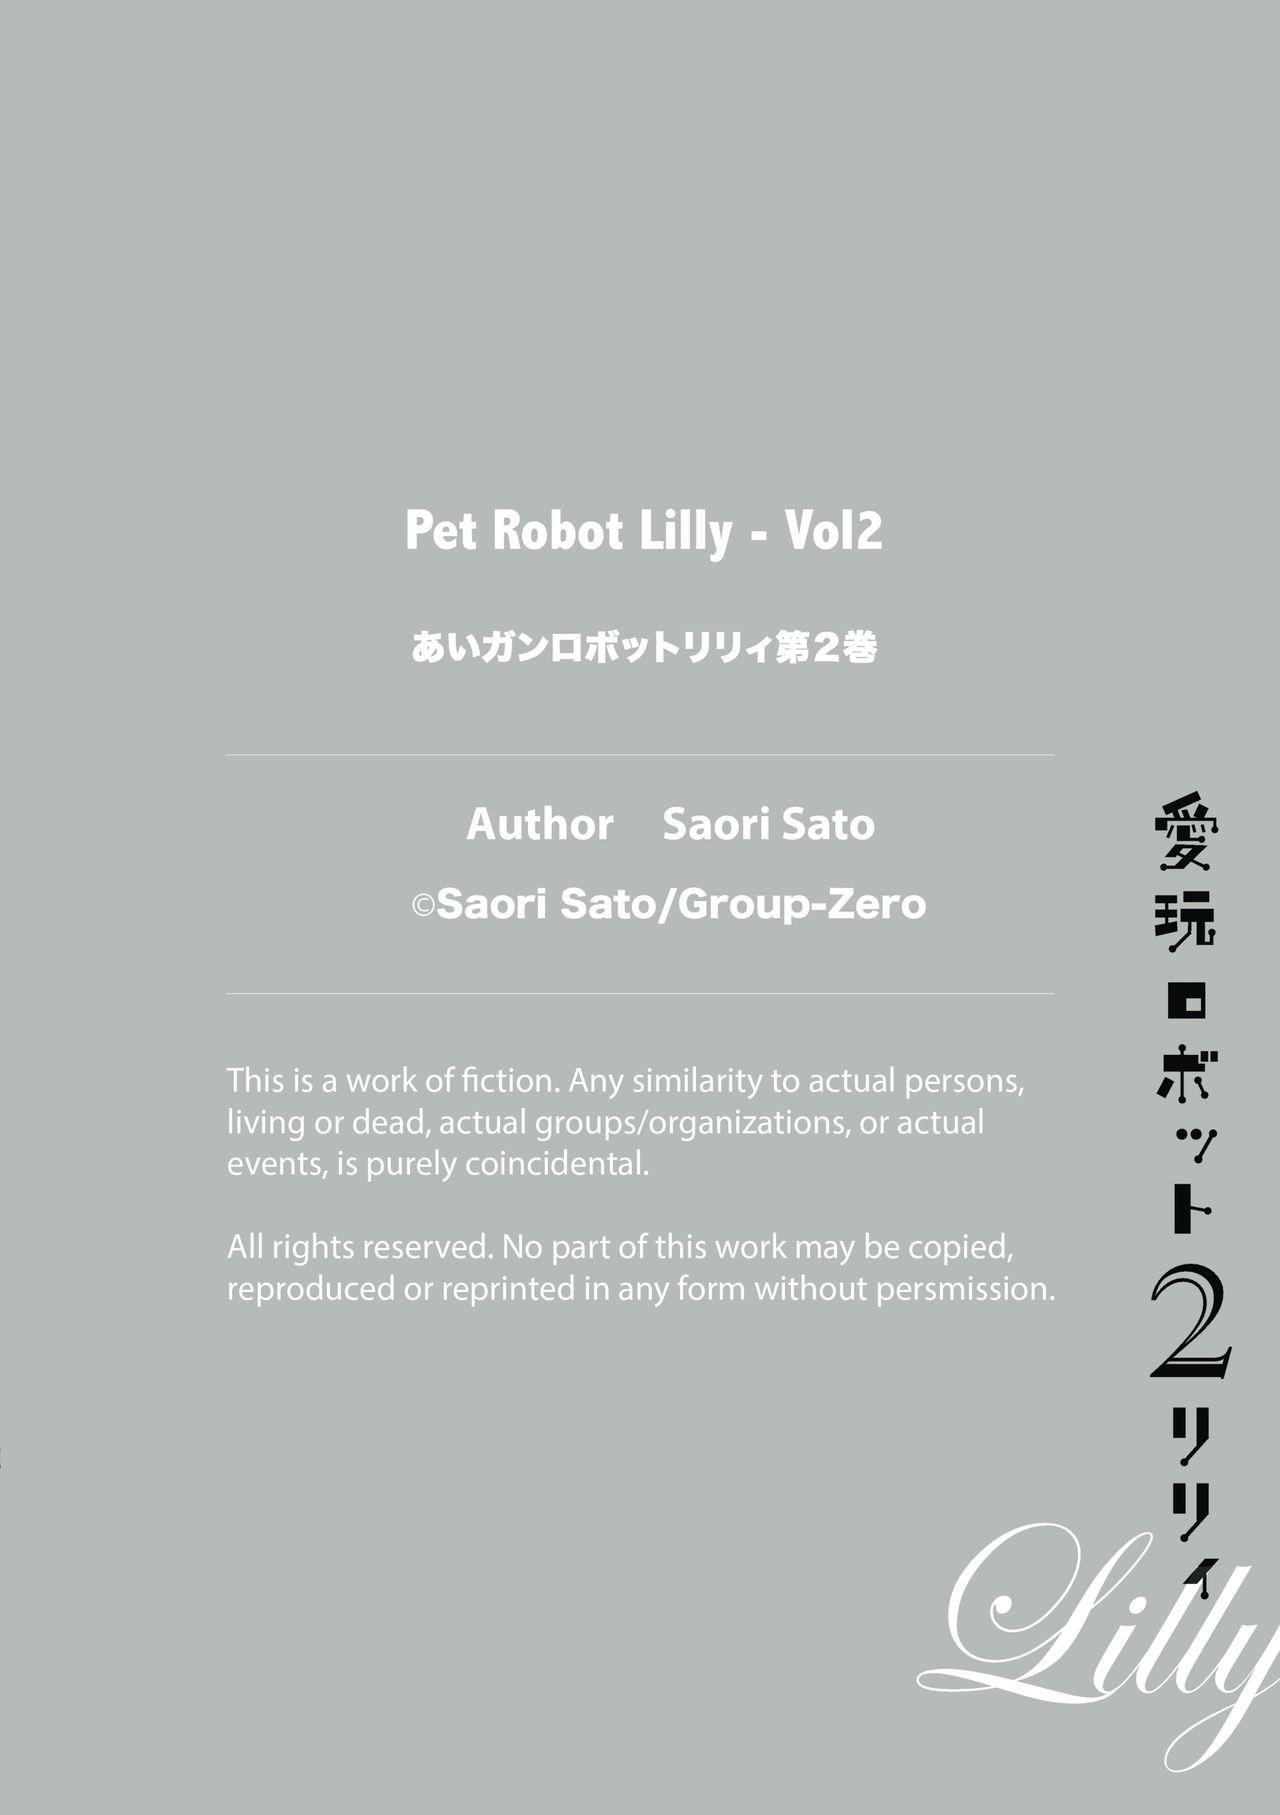 Camshow Aigan Robot Lilly - Pet Robot Lilly Vol. 2 Anus - Page 152